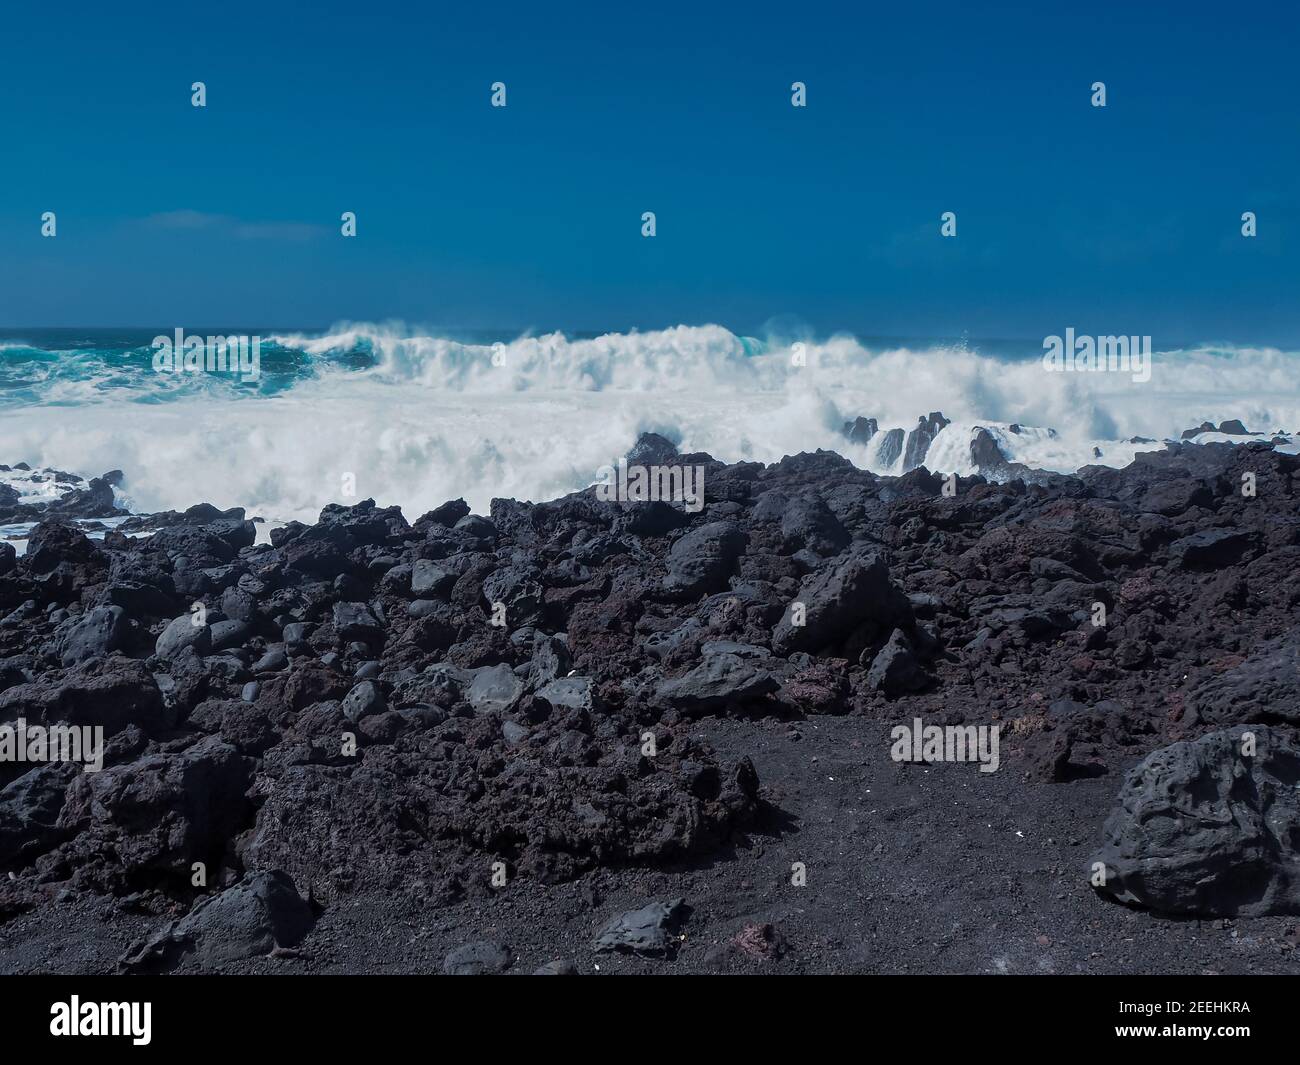 Atlantic waves with white surf meeting the black volcanic coast at El Golfo, Lanzarote, Canary Islands, with a clear blue sky Stock Photo